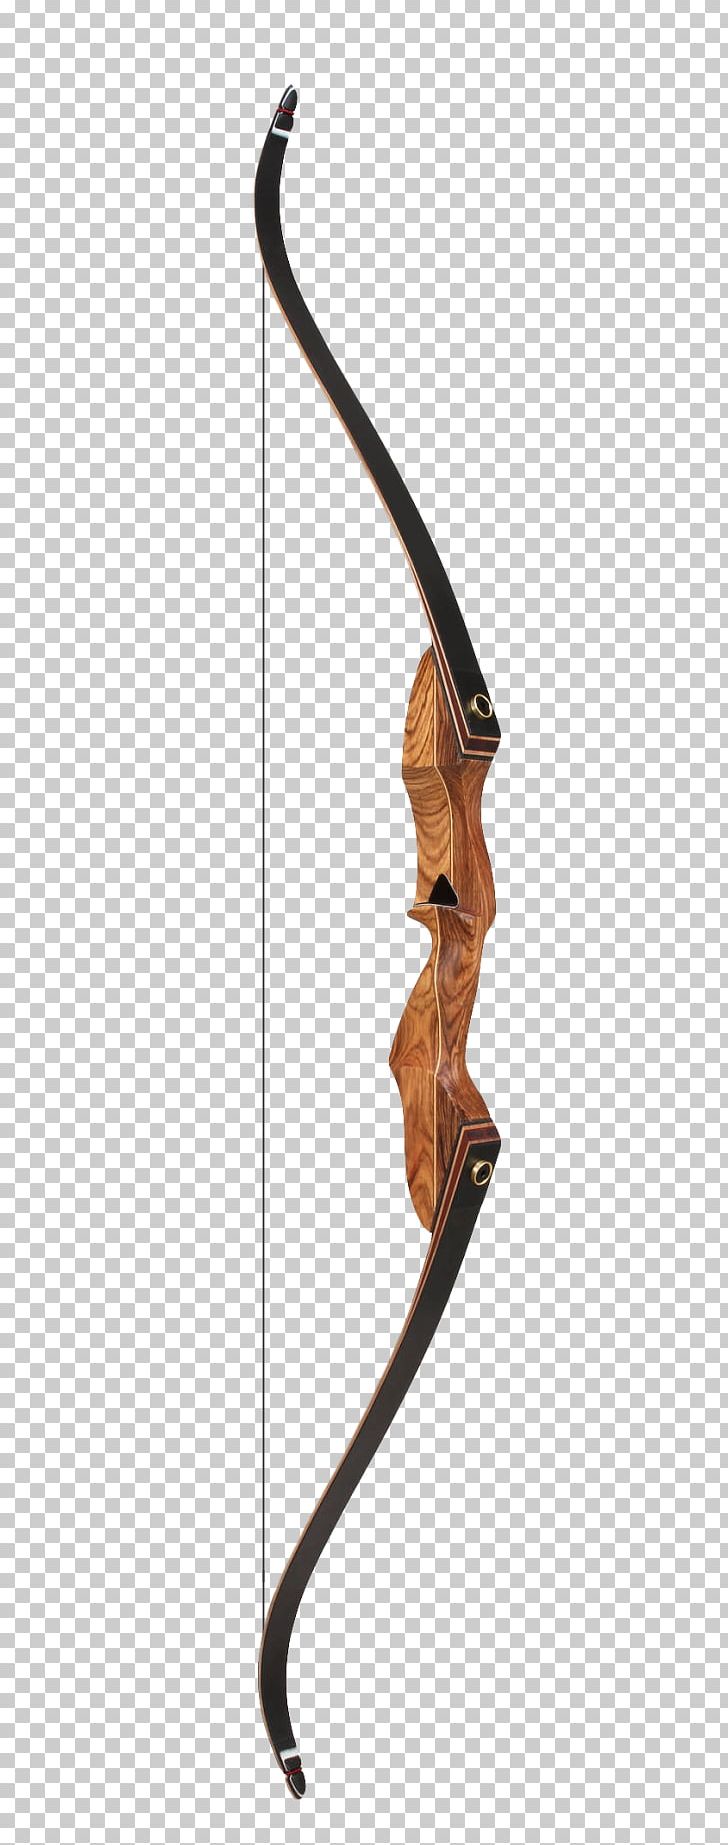 Bow And Arrow Weapon Recurve Bow PNG, Clipart, Archery, Arrow, Arrow Bow, Bow, Bow And Arrow Free PNG Download